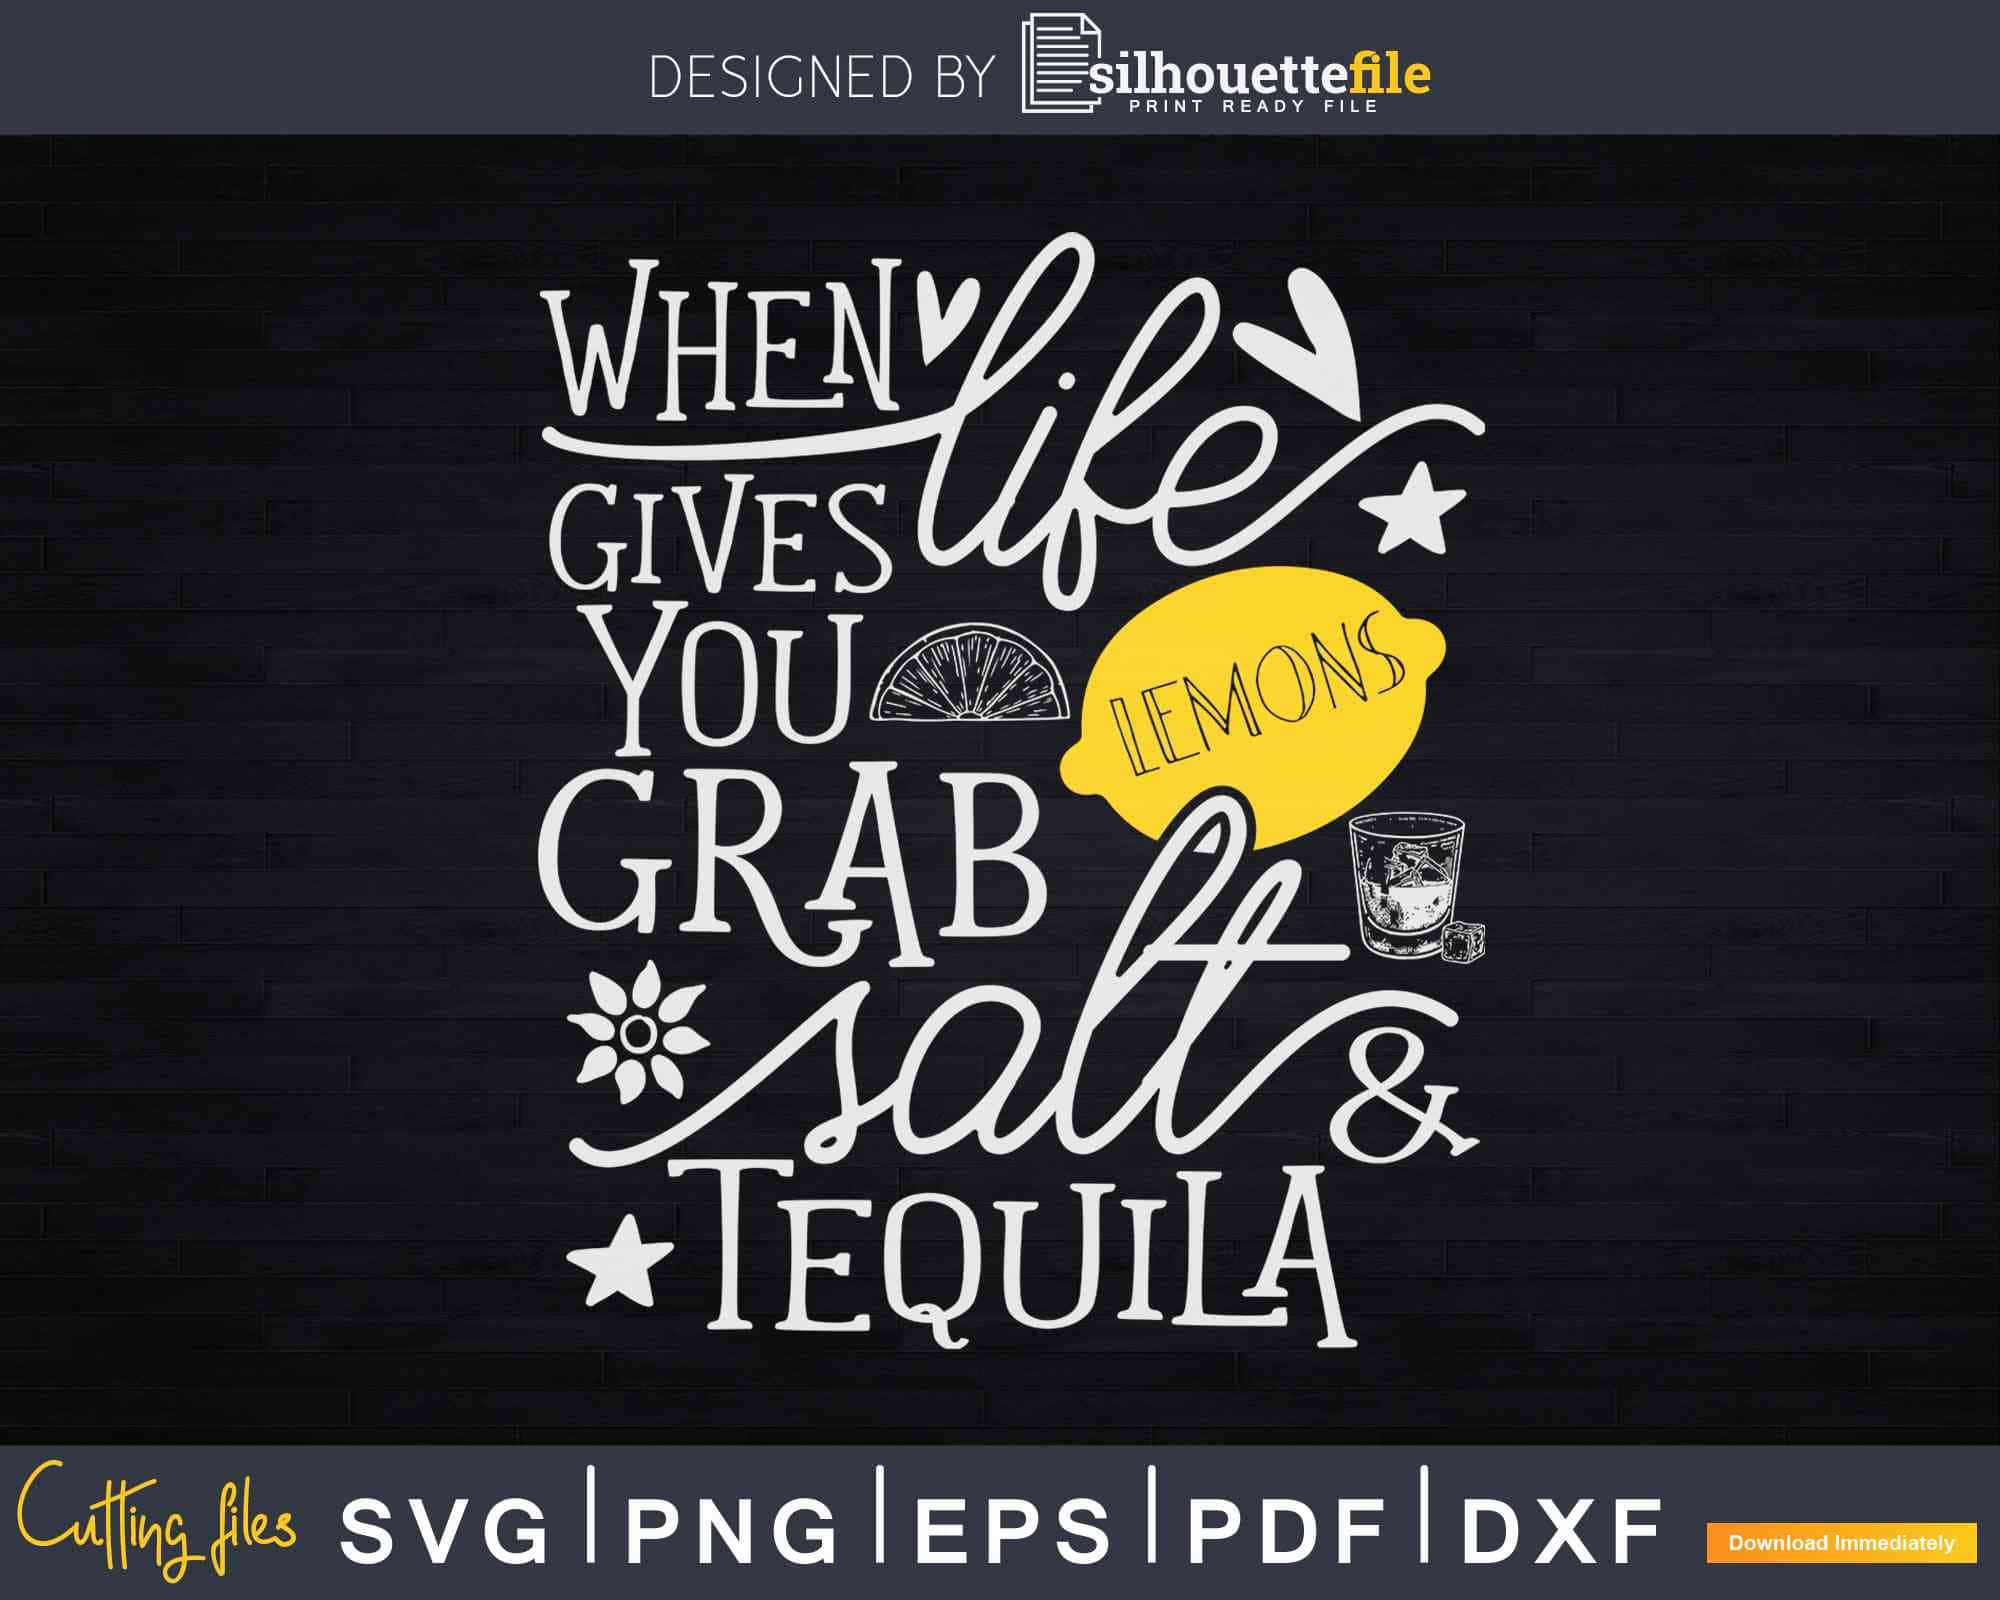 Download When Life Gives You Lemons Grab Salt Tequila Svg Cut Files Silhouettefile